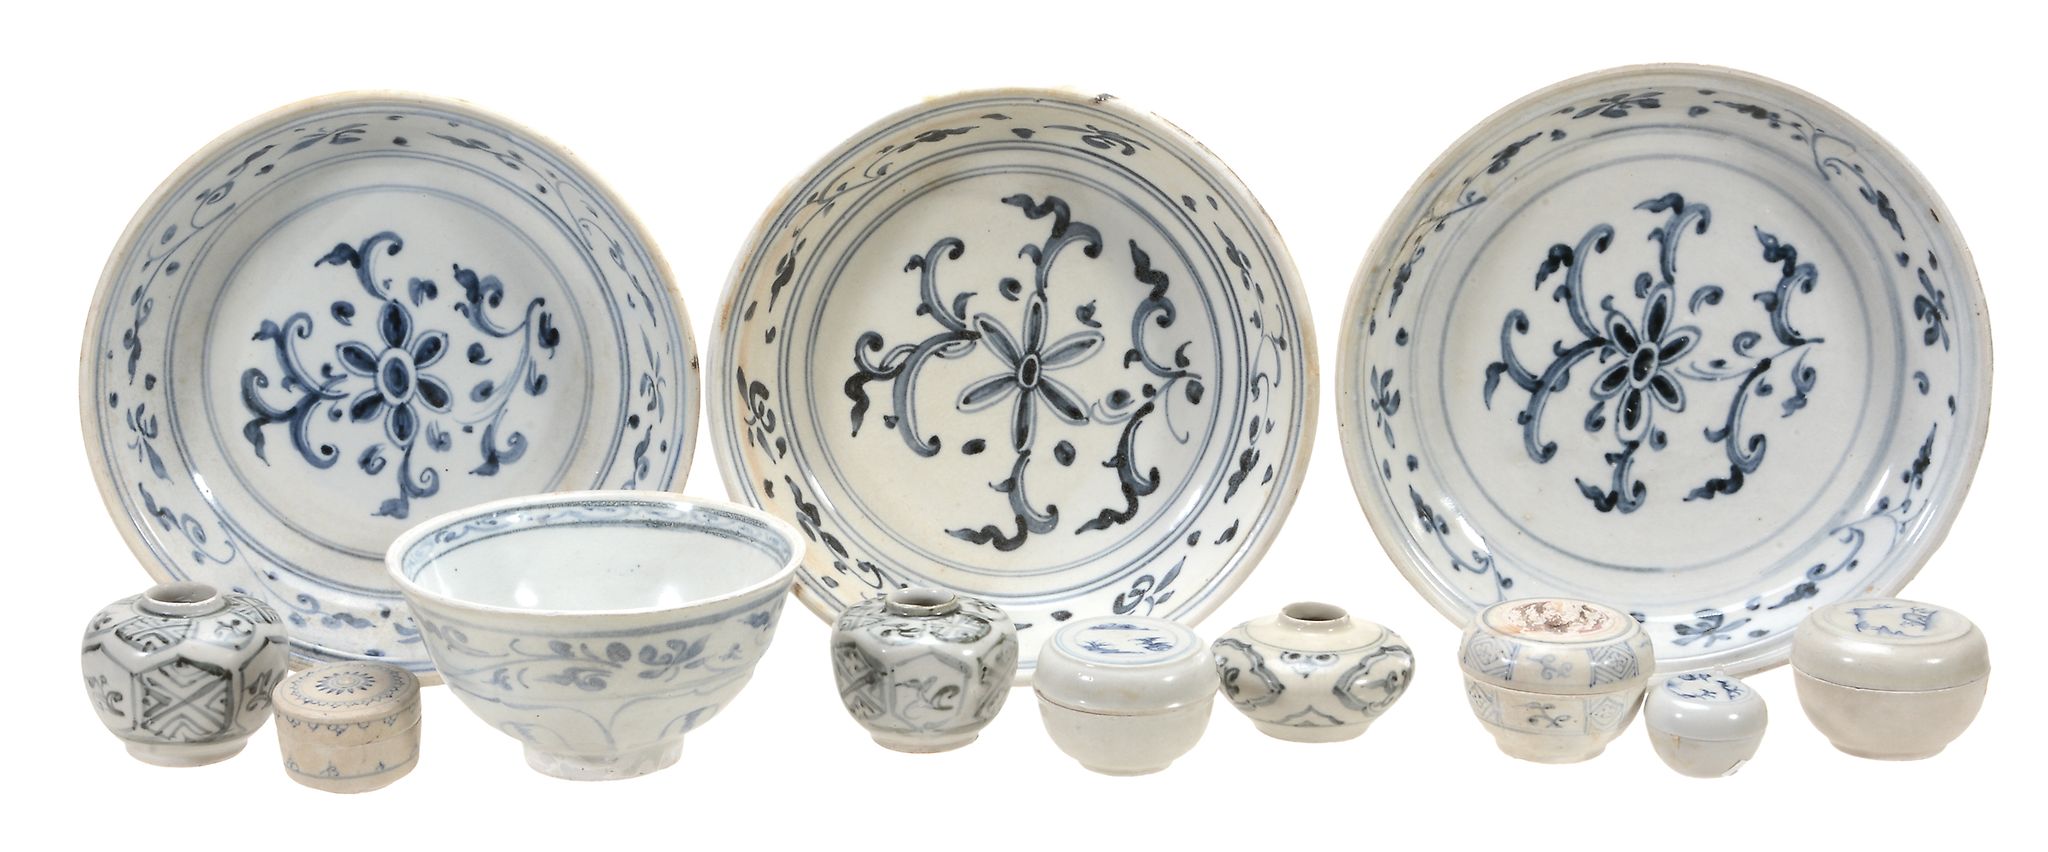 A group of Hoi An Hoard blue and whiteVietnamese porcelain  ,   15th century  , comprising: three